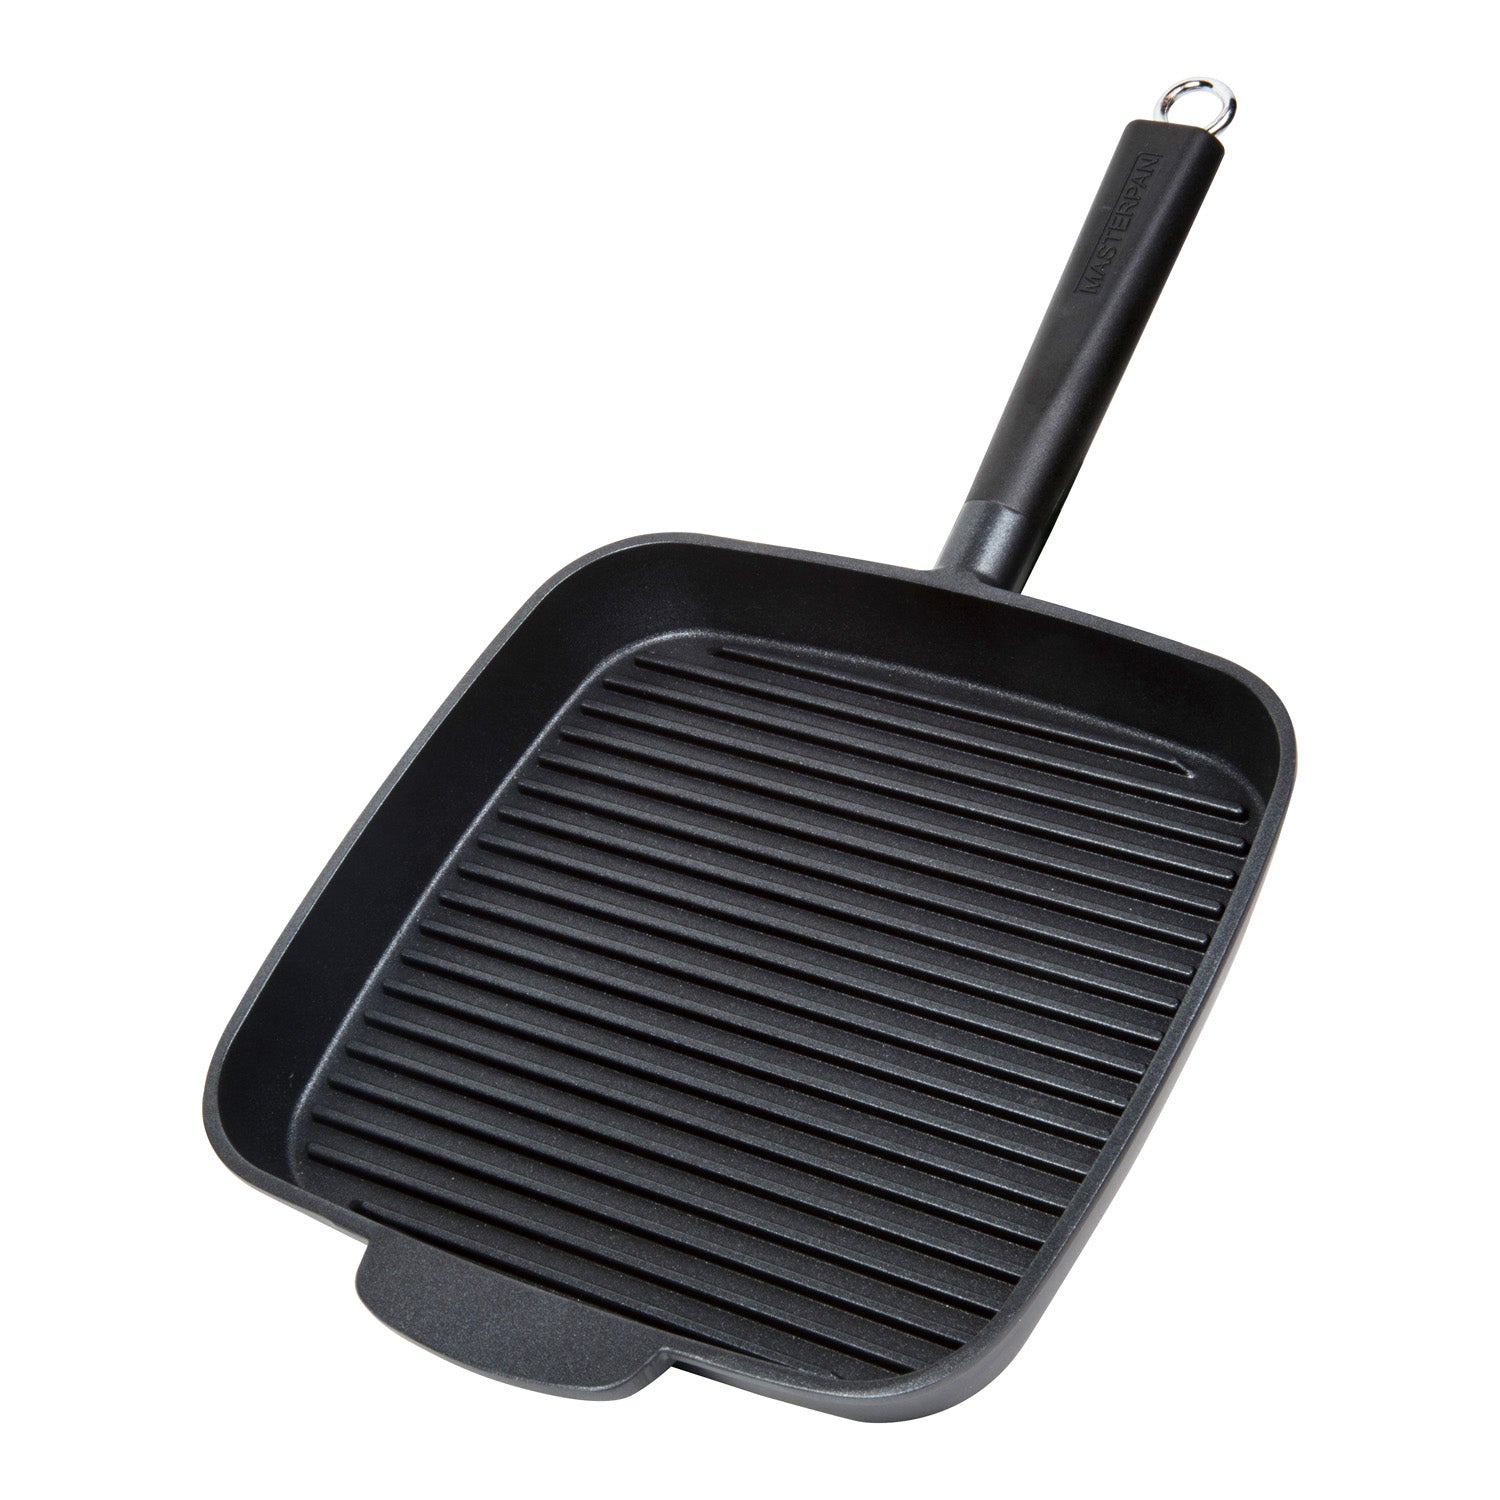 MasterPan 11-in. 3-Section Non-Stick Meal Skillet - Black